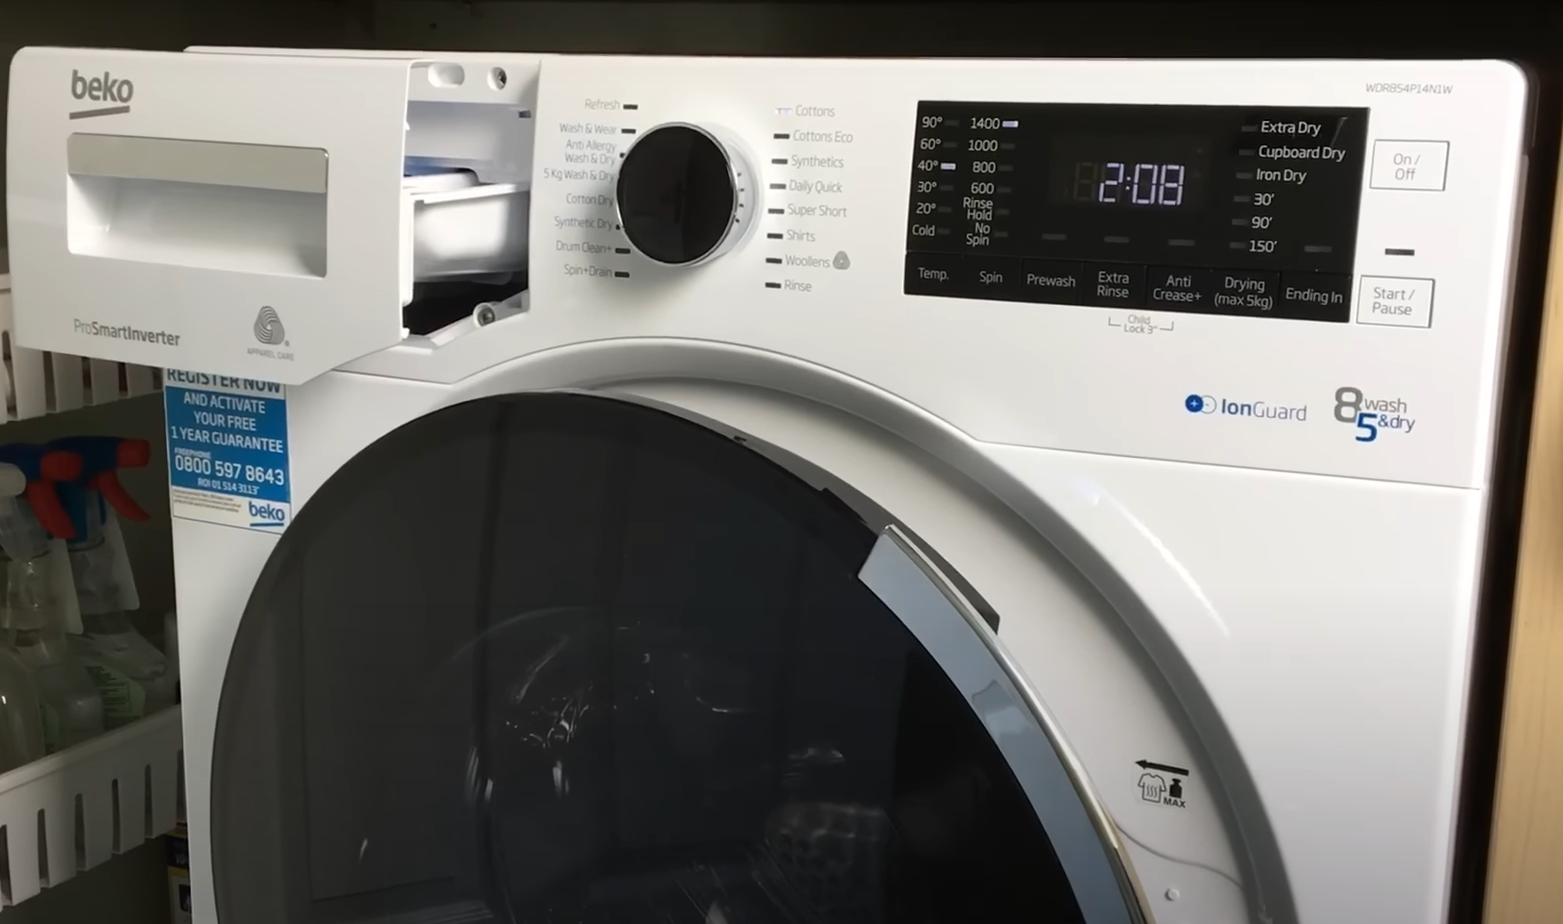 Beko Washer Dryer with the soap tray open